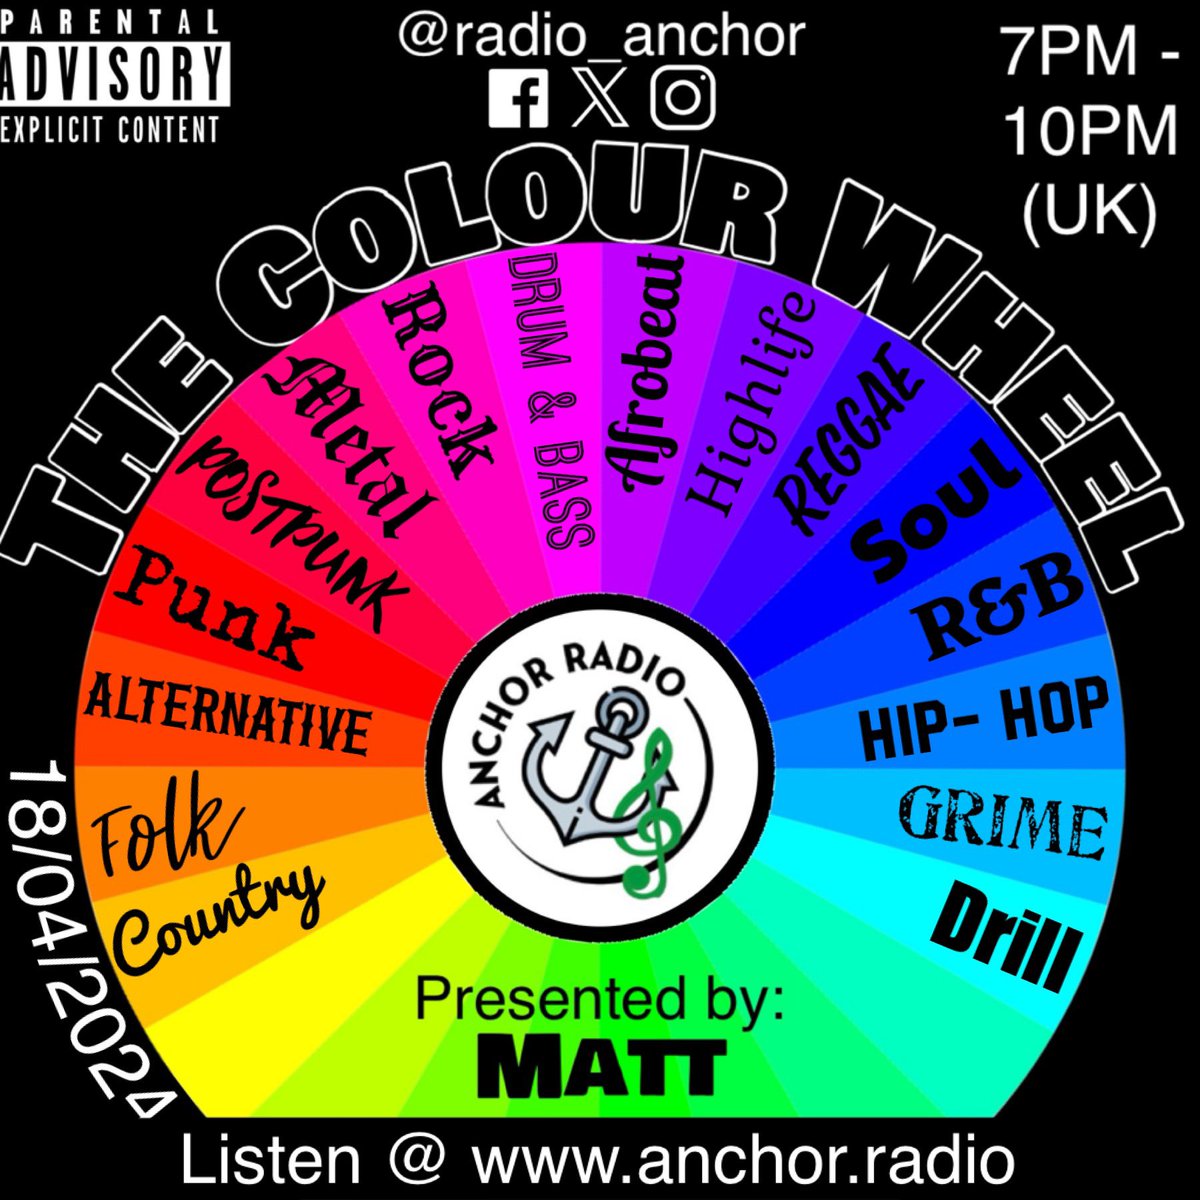 Add a soundtrack to your Thursday evening by tuning into The Colour Wheel! Let @matt02392 take you on a journey of musical discovery from 7PM (UK) Listen @ anchor.radio